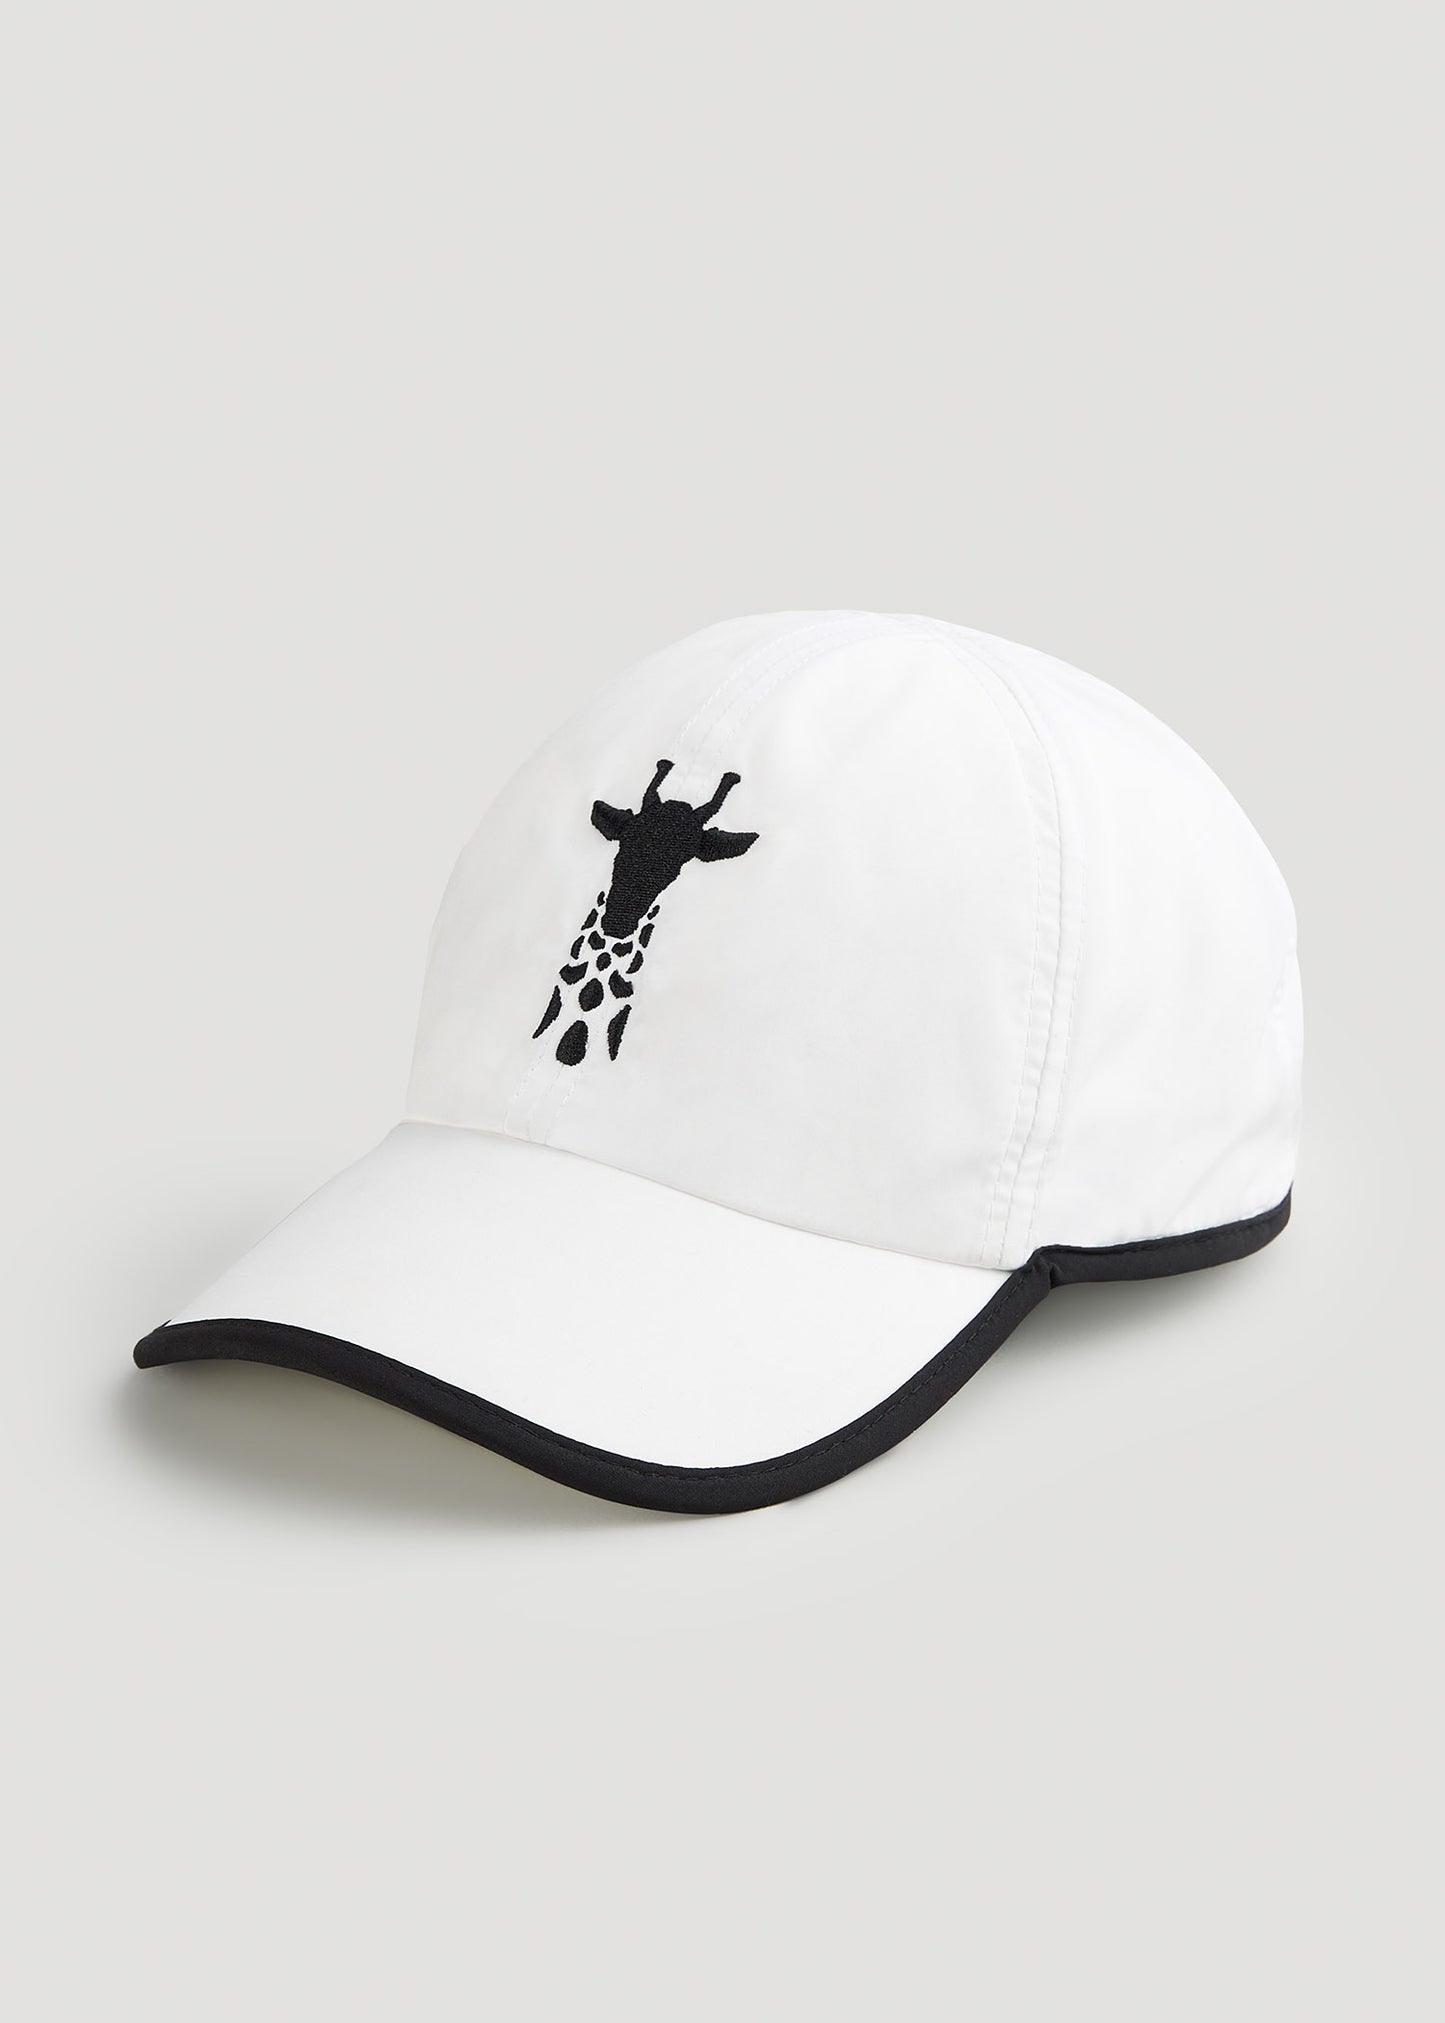 Front, side-view of American Tall's Tall Lightweight Performance Hat in Bright White.